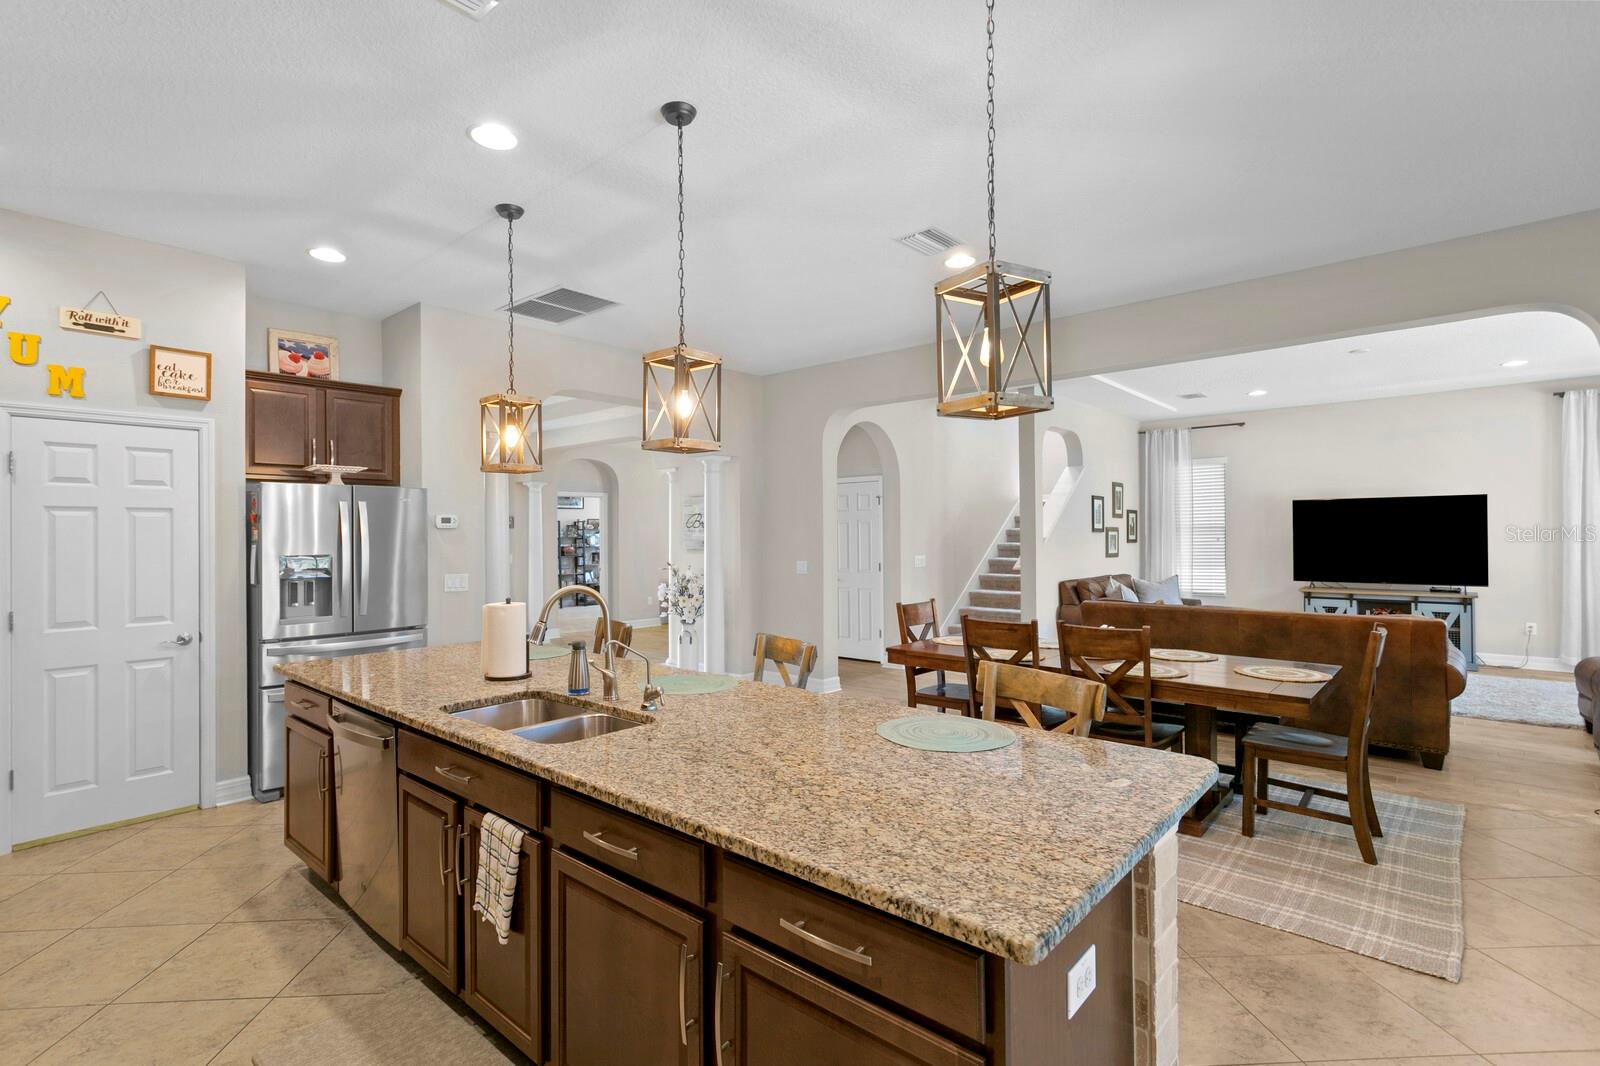 Enjoy entertaining in your kitchen with full view of the living room.